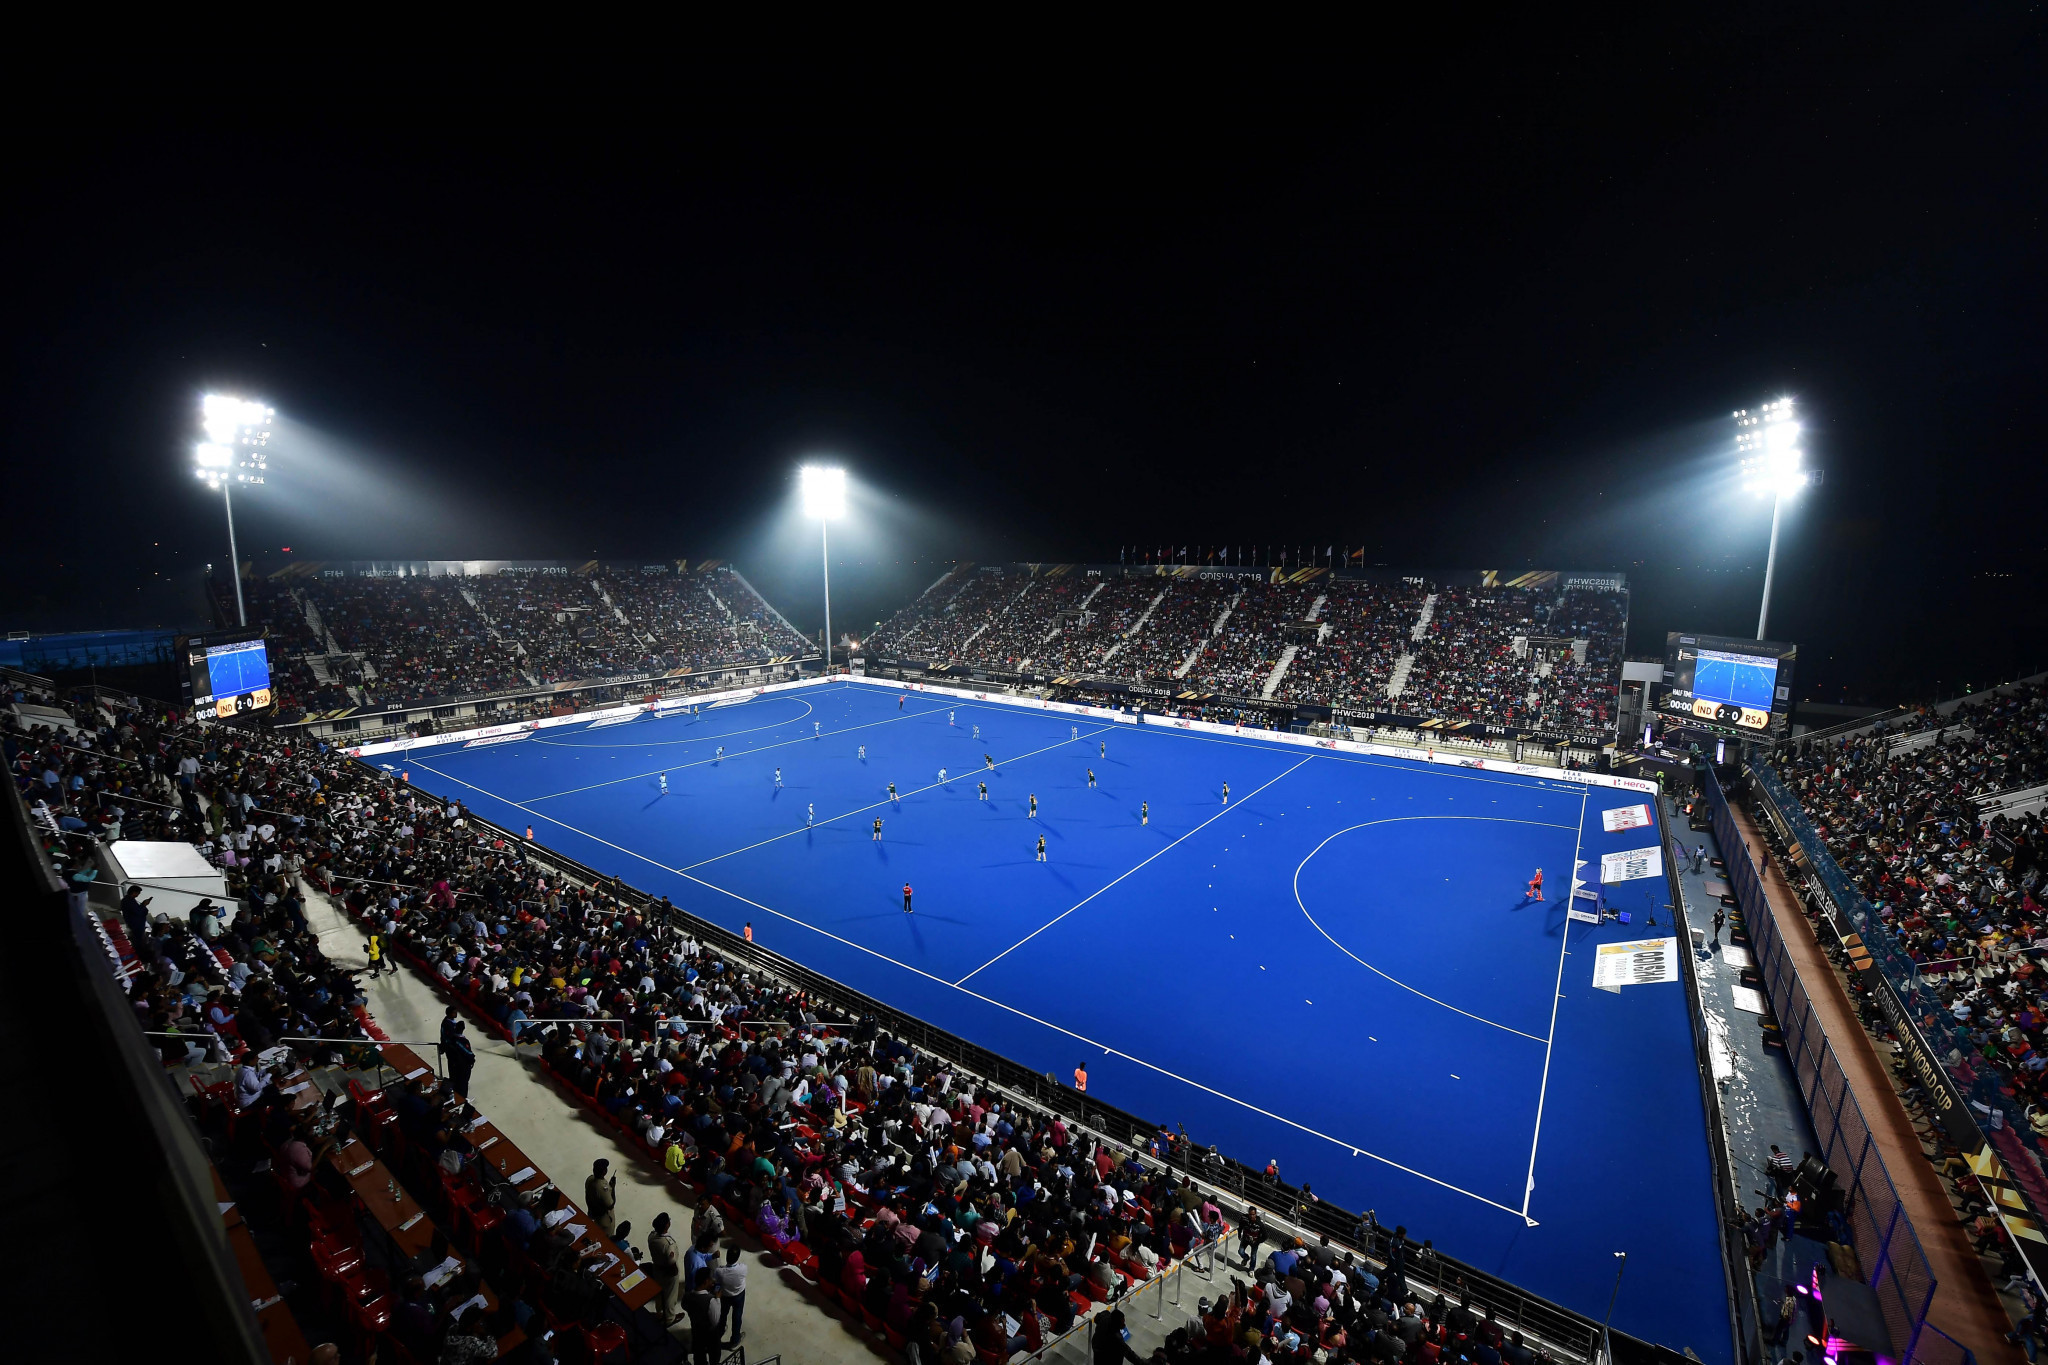 The FIH was updated on the progress of preparations for the Men's Hockey World Cup in January 2023 ©Getty Images